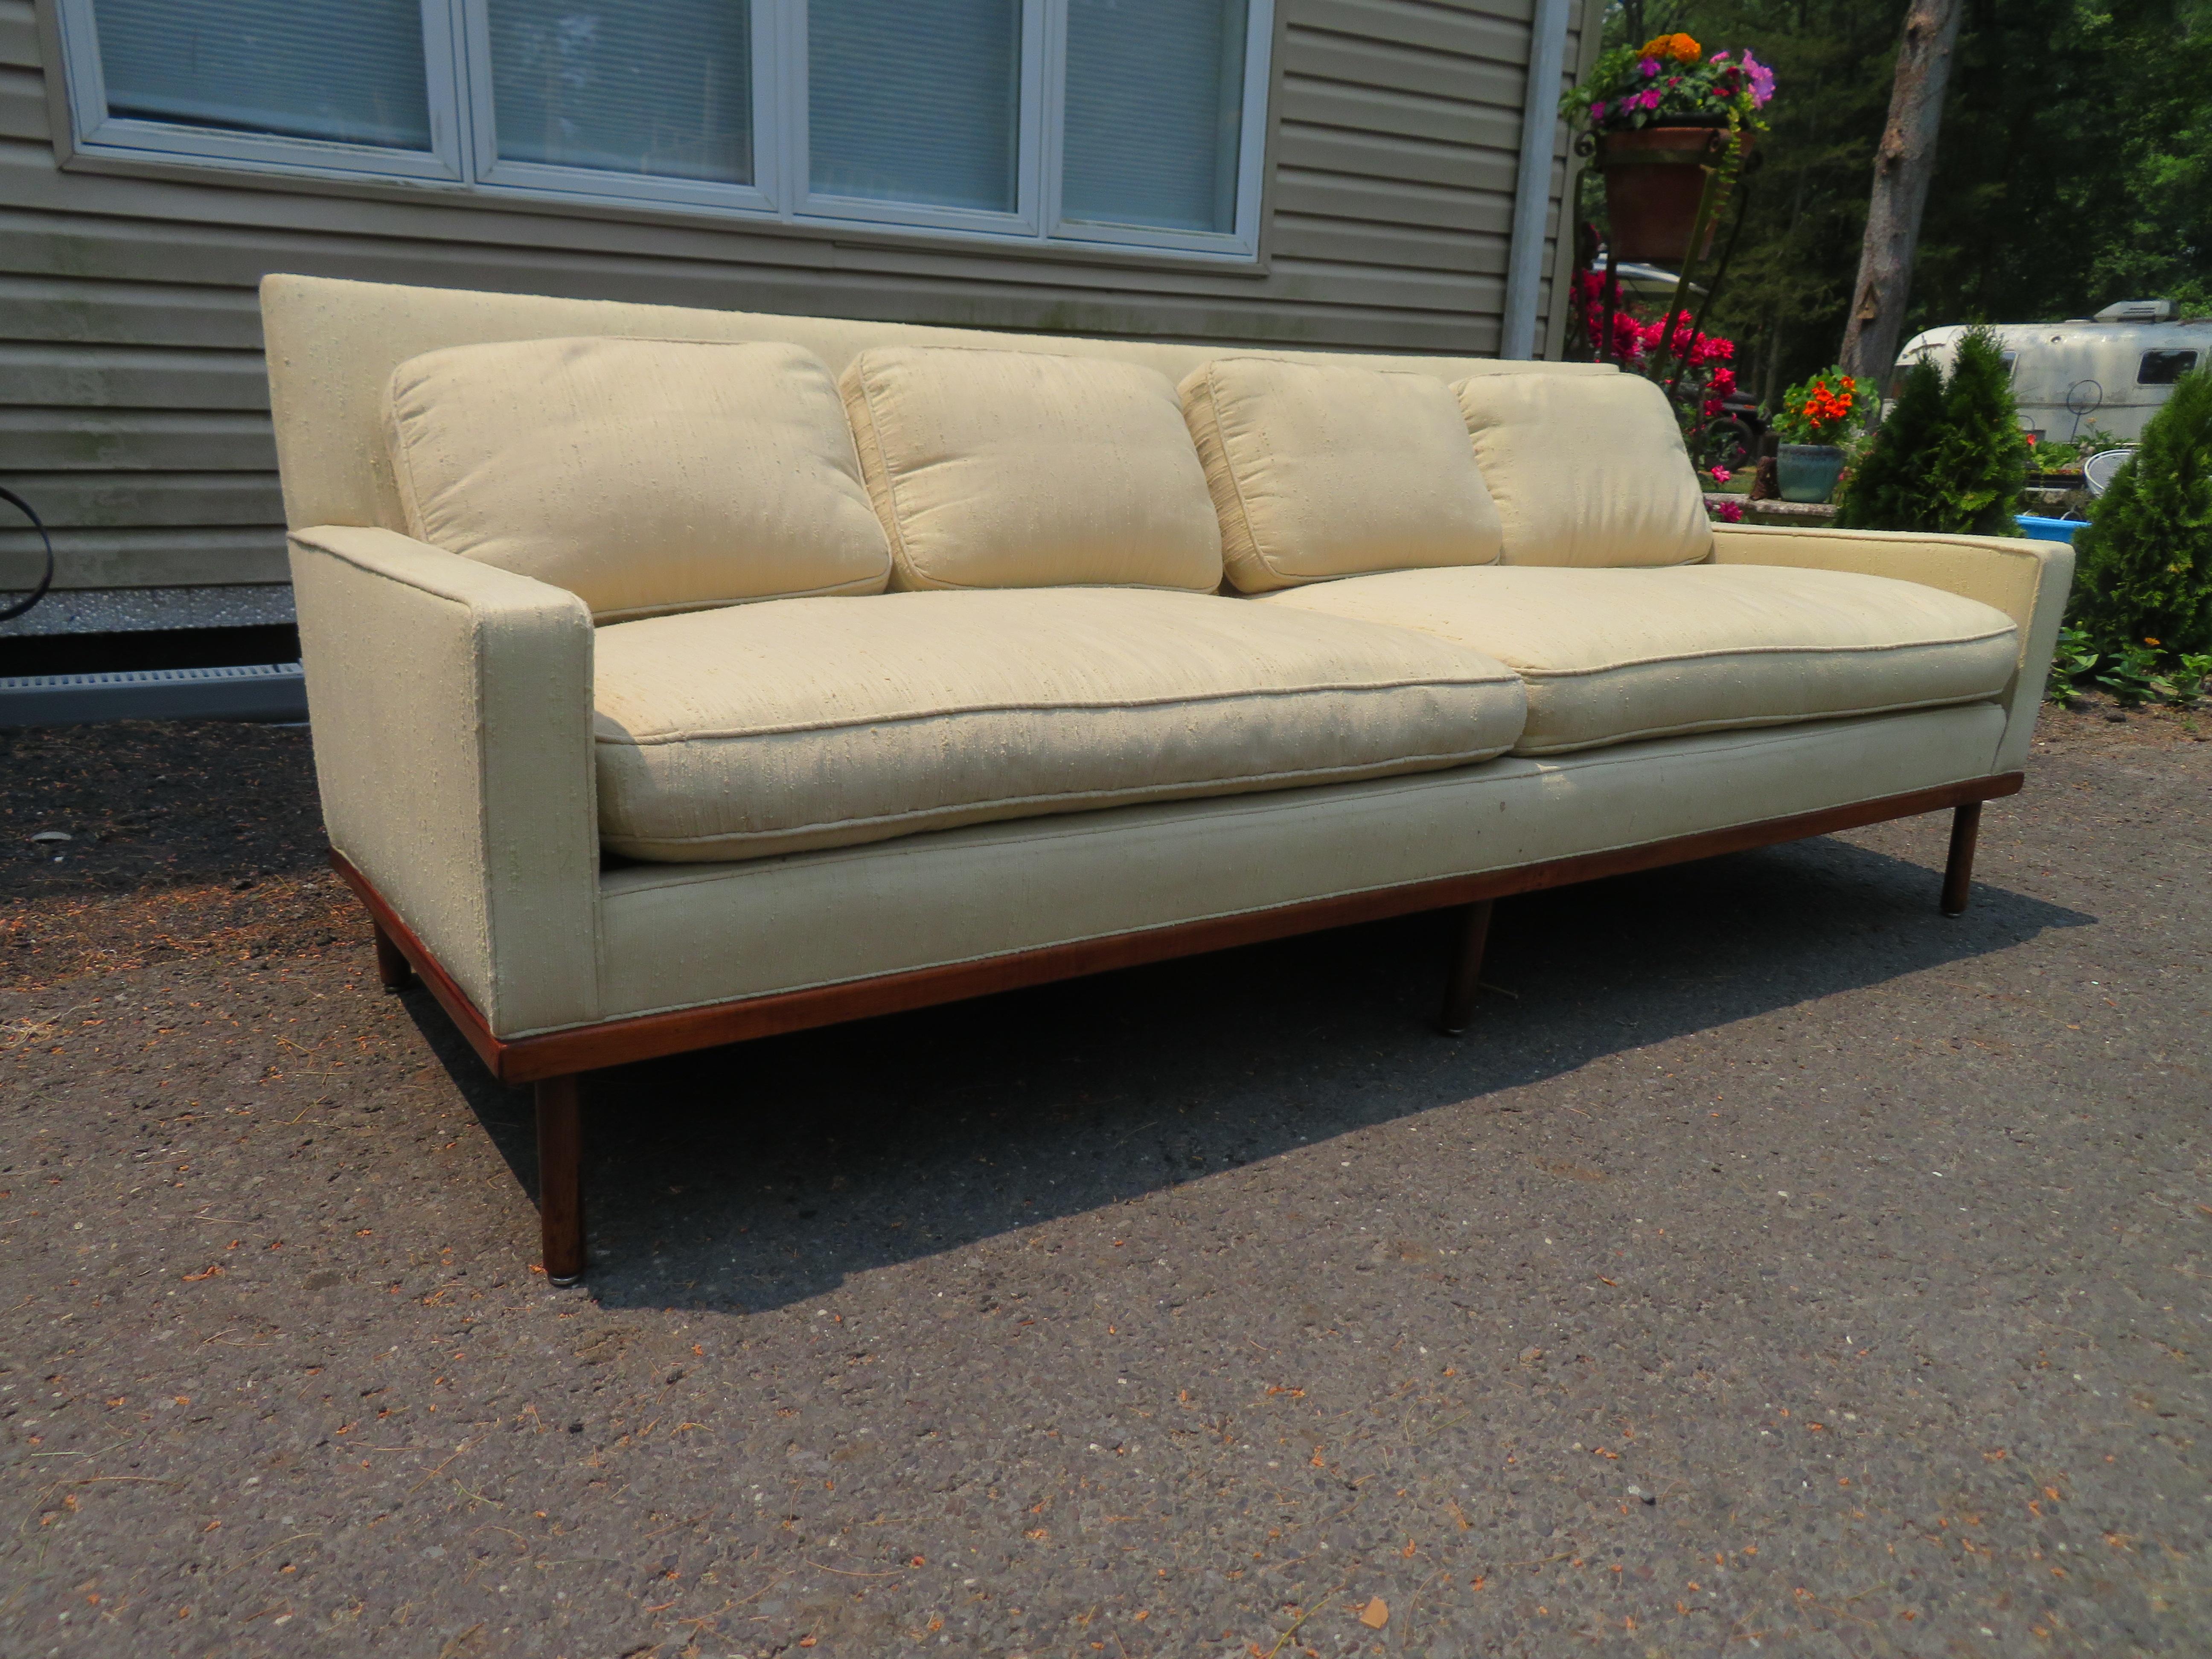 Fabulous Milo Baughman style walnut base sofa. The original white nubby fabric is in presentable vintage condition and could be used as is. This piece measures 30